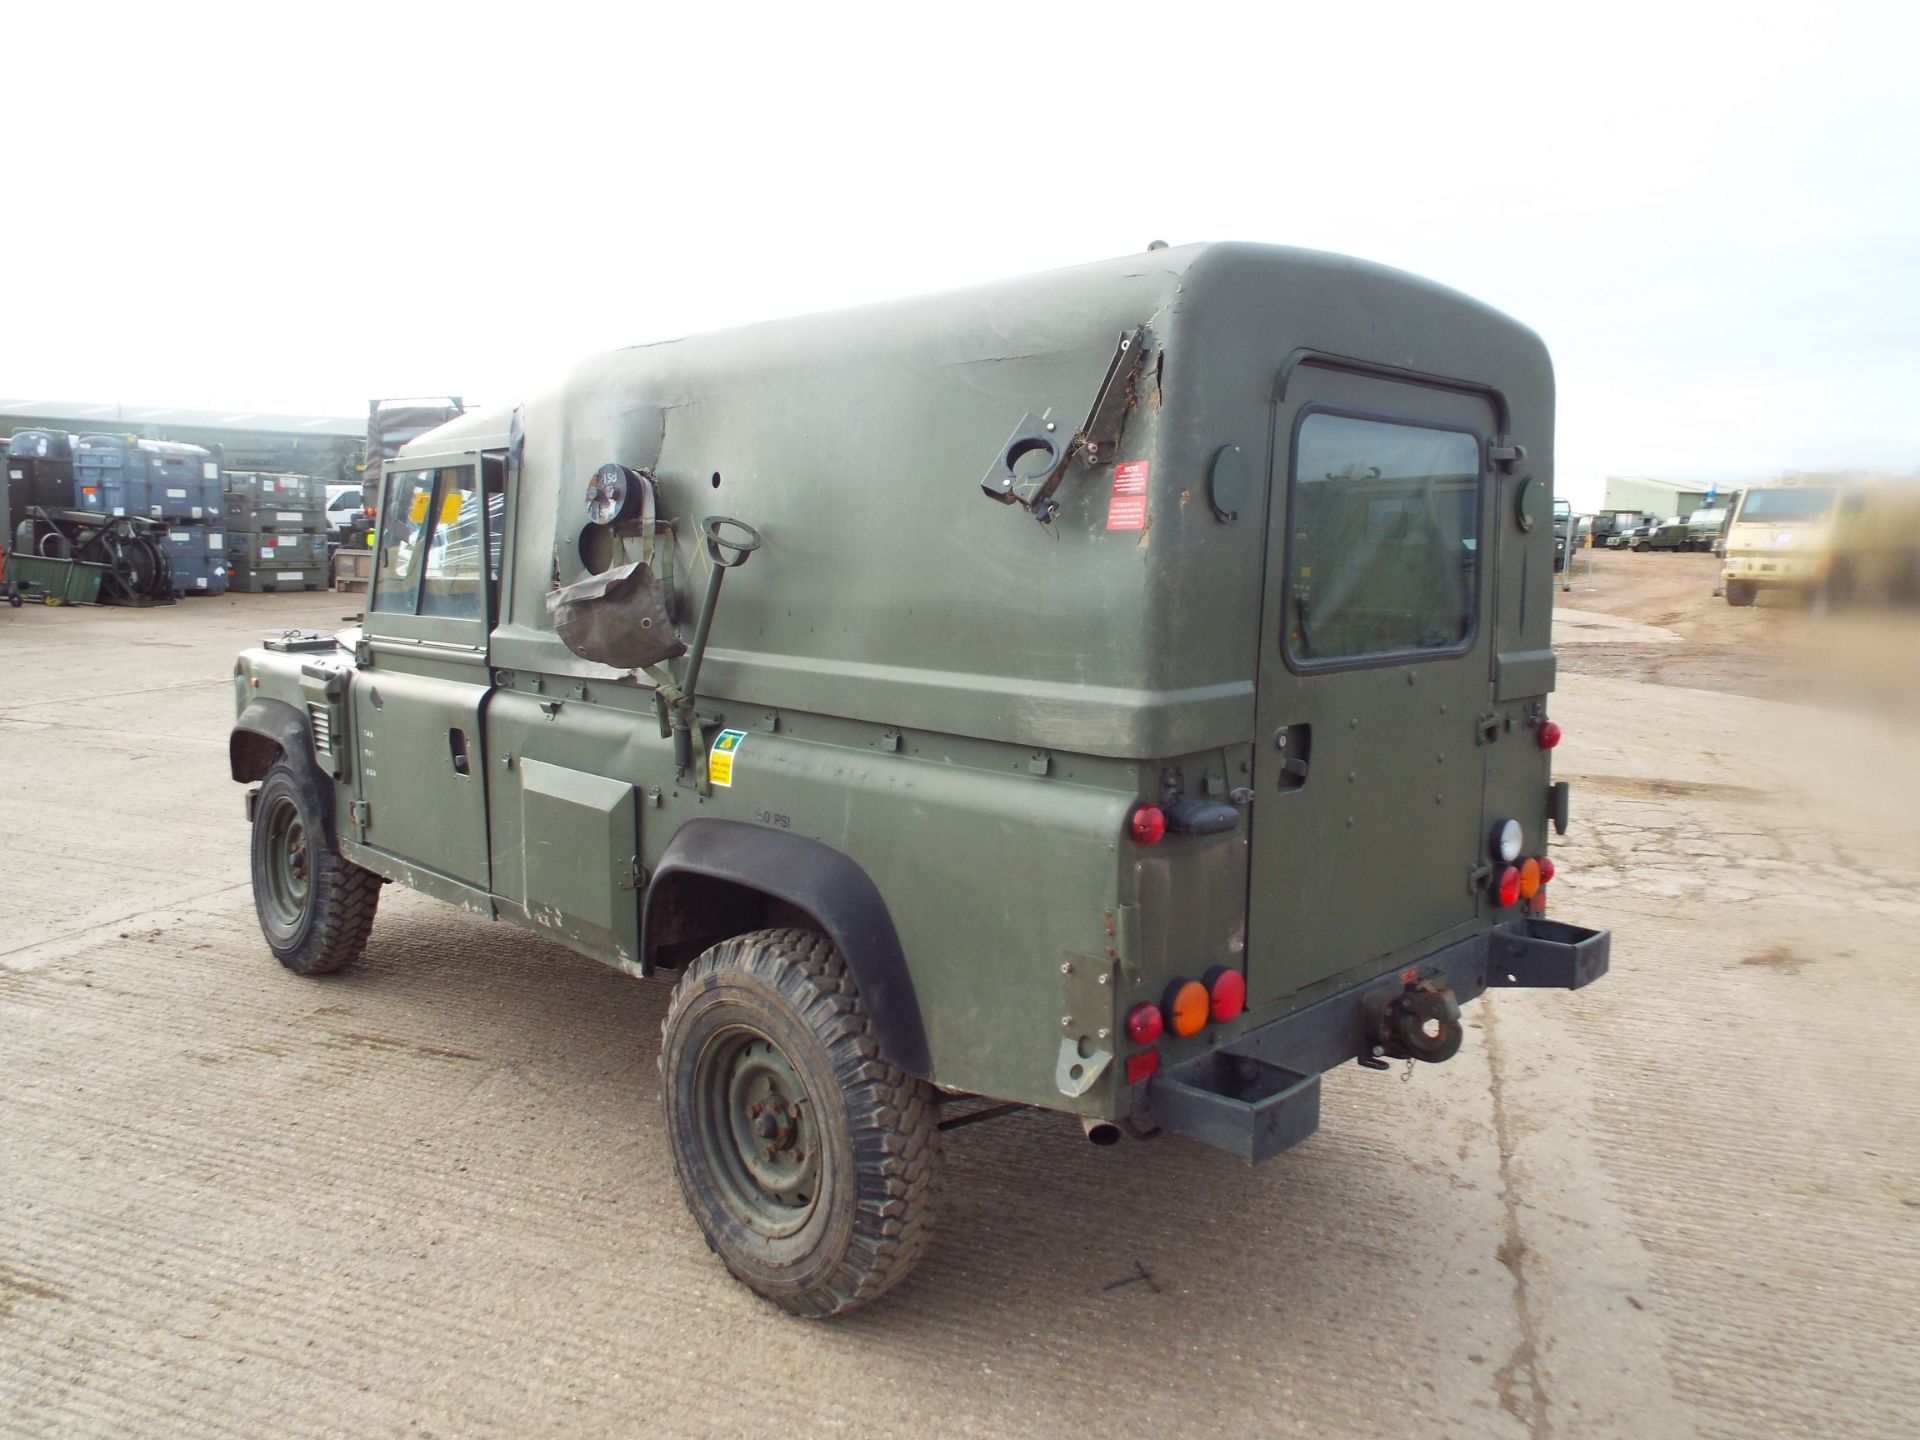 Military Specification Land Rover Wolf 110 Hard Top - Image 5 of 25